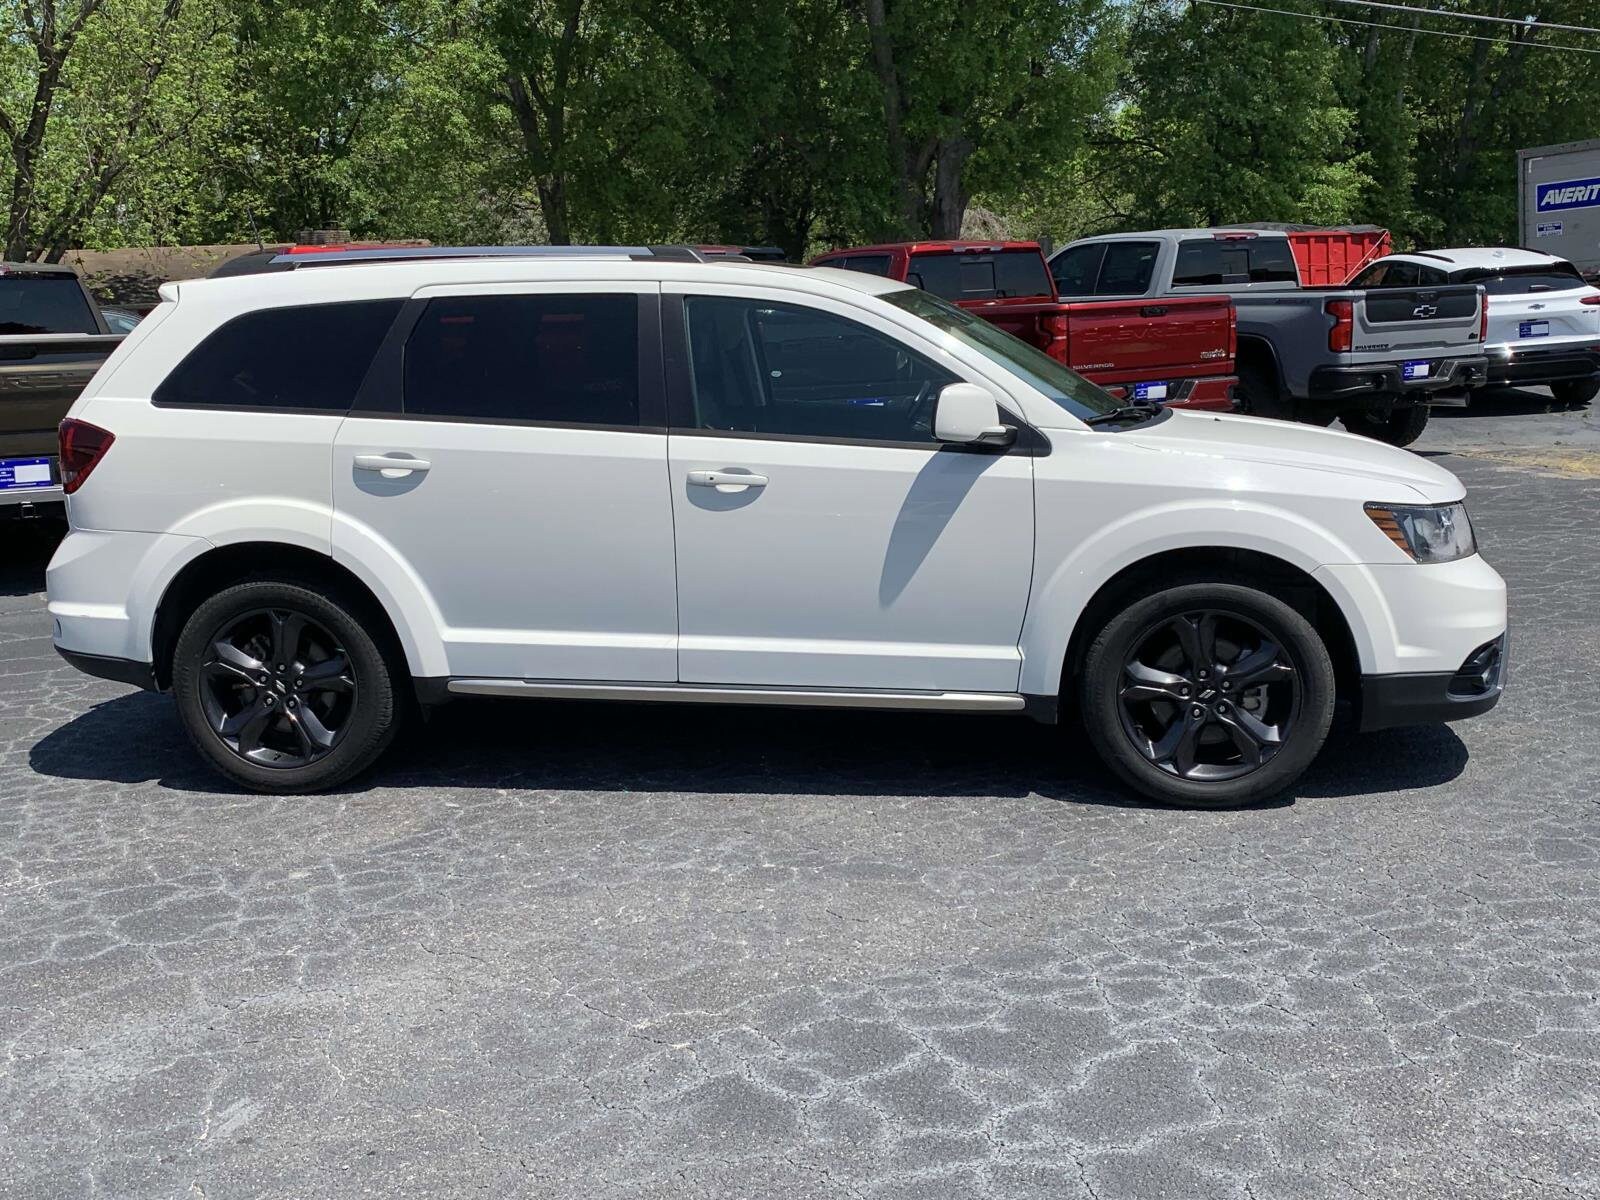 Used 2020 Dodge Journey Crossroad with VIN 3C4PDCGB0LT268551 for sale in Royston, GA